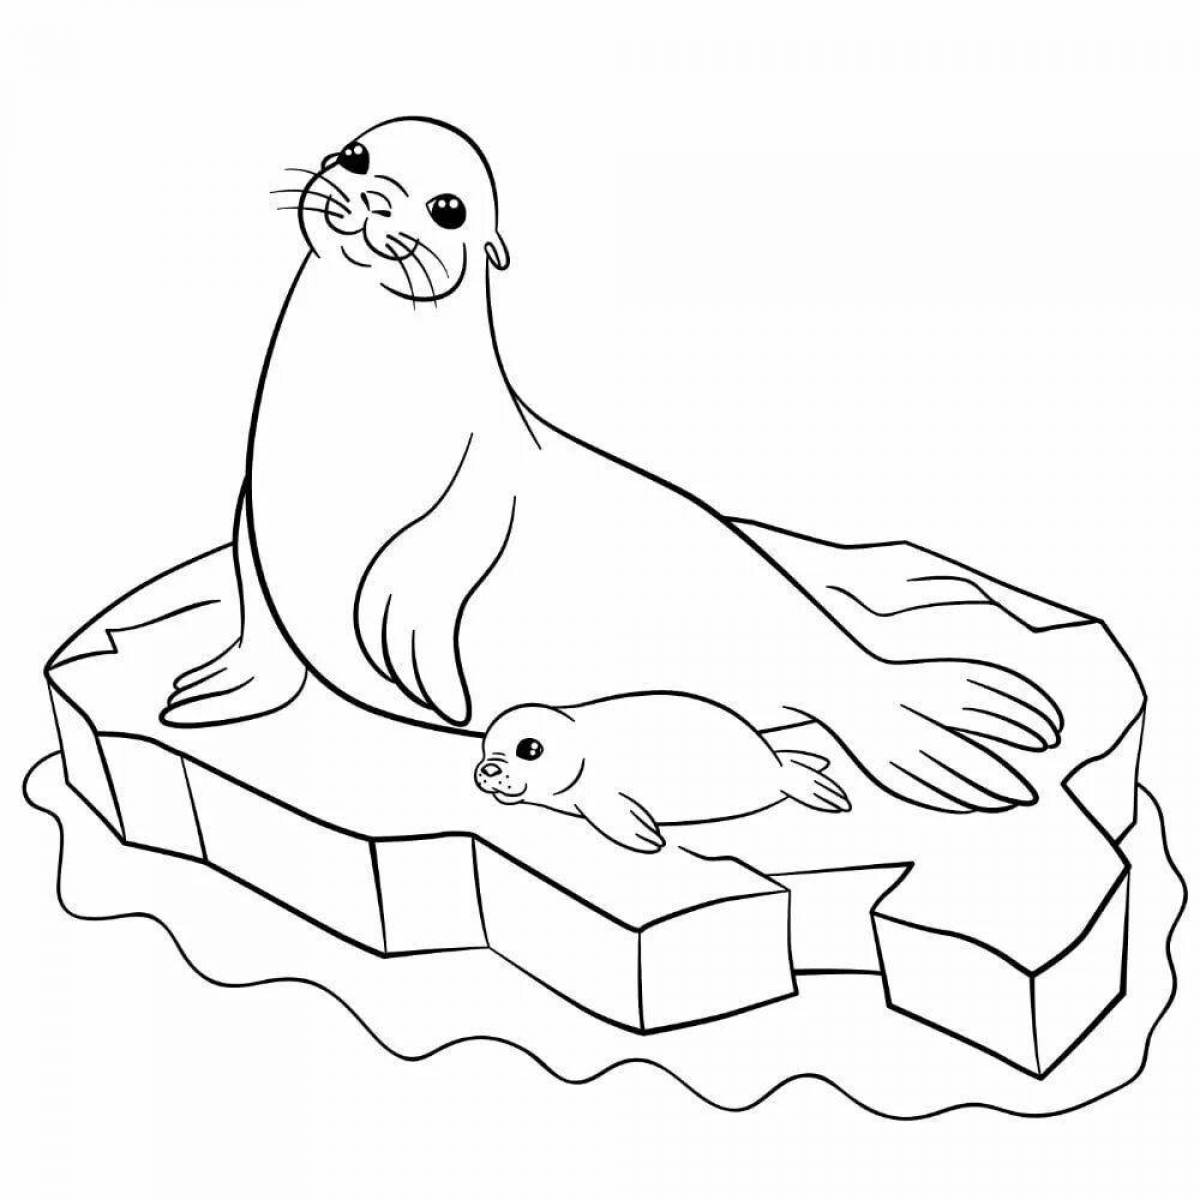 Colouring adorable seal on ice